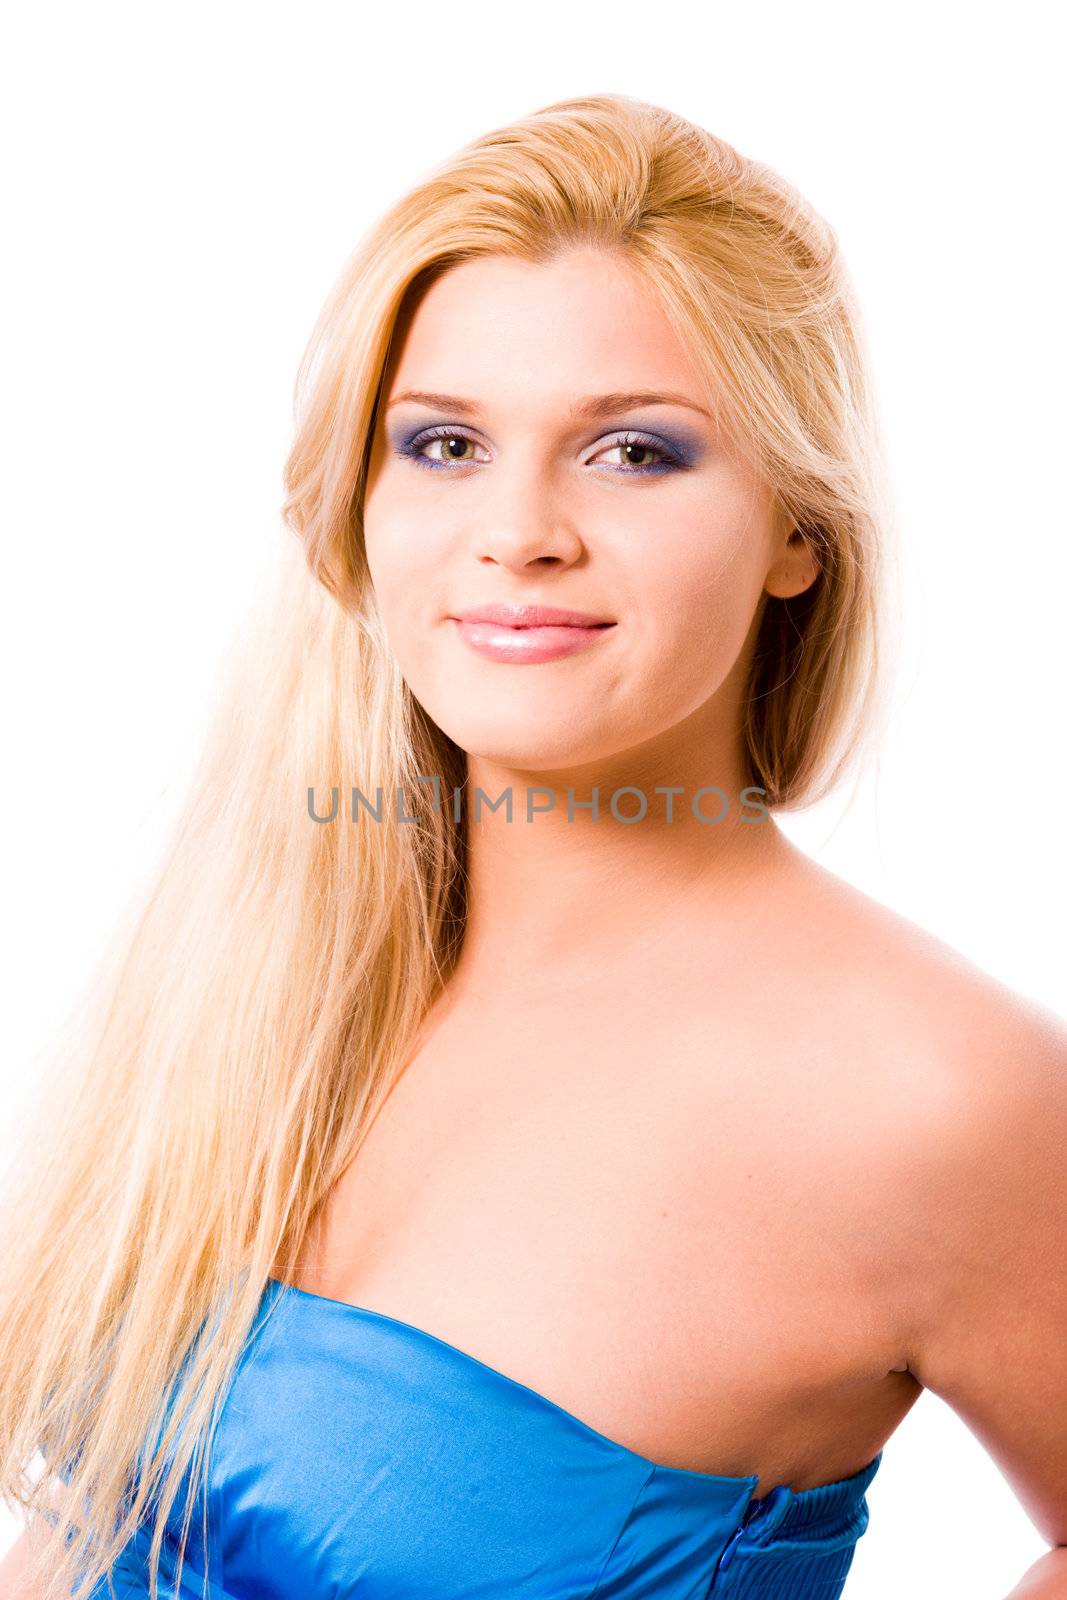 Young beautiful blond woman close-up portrait isolated on white